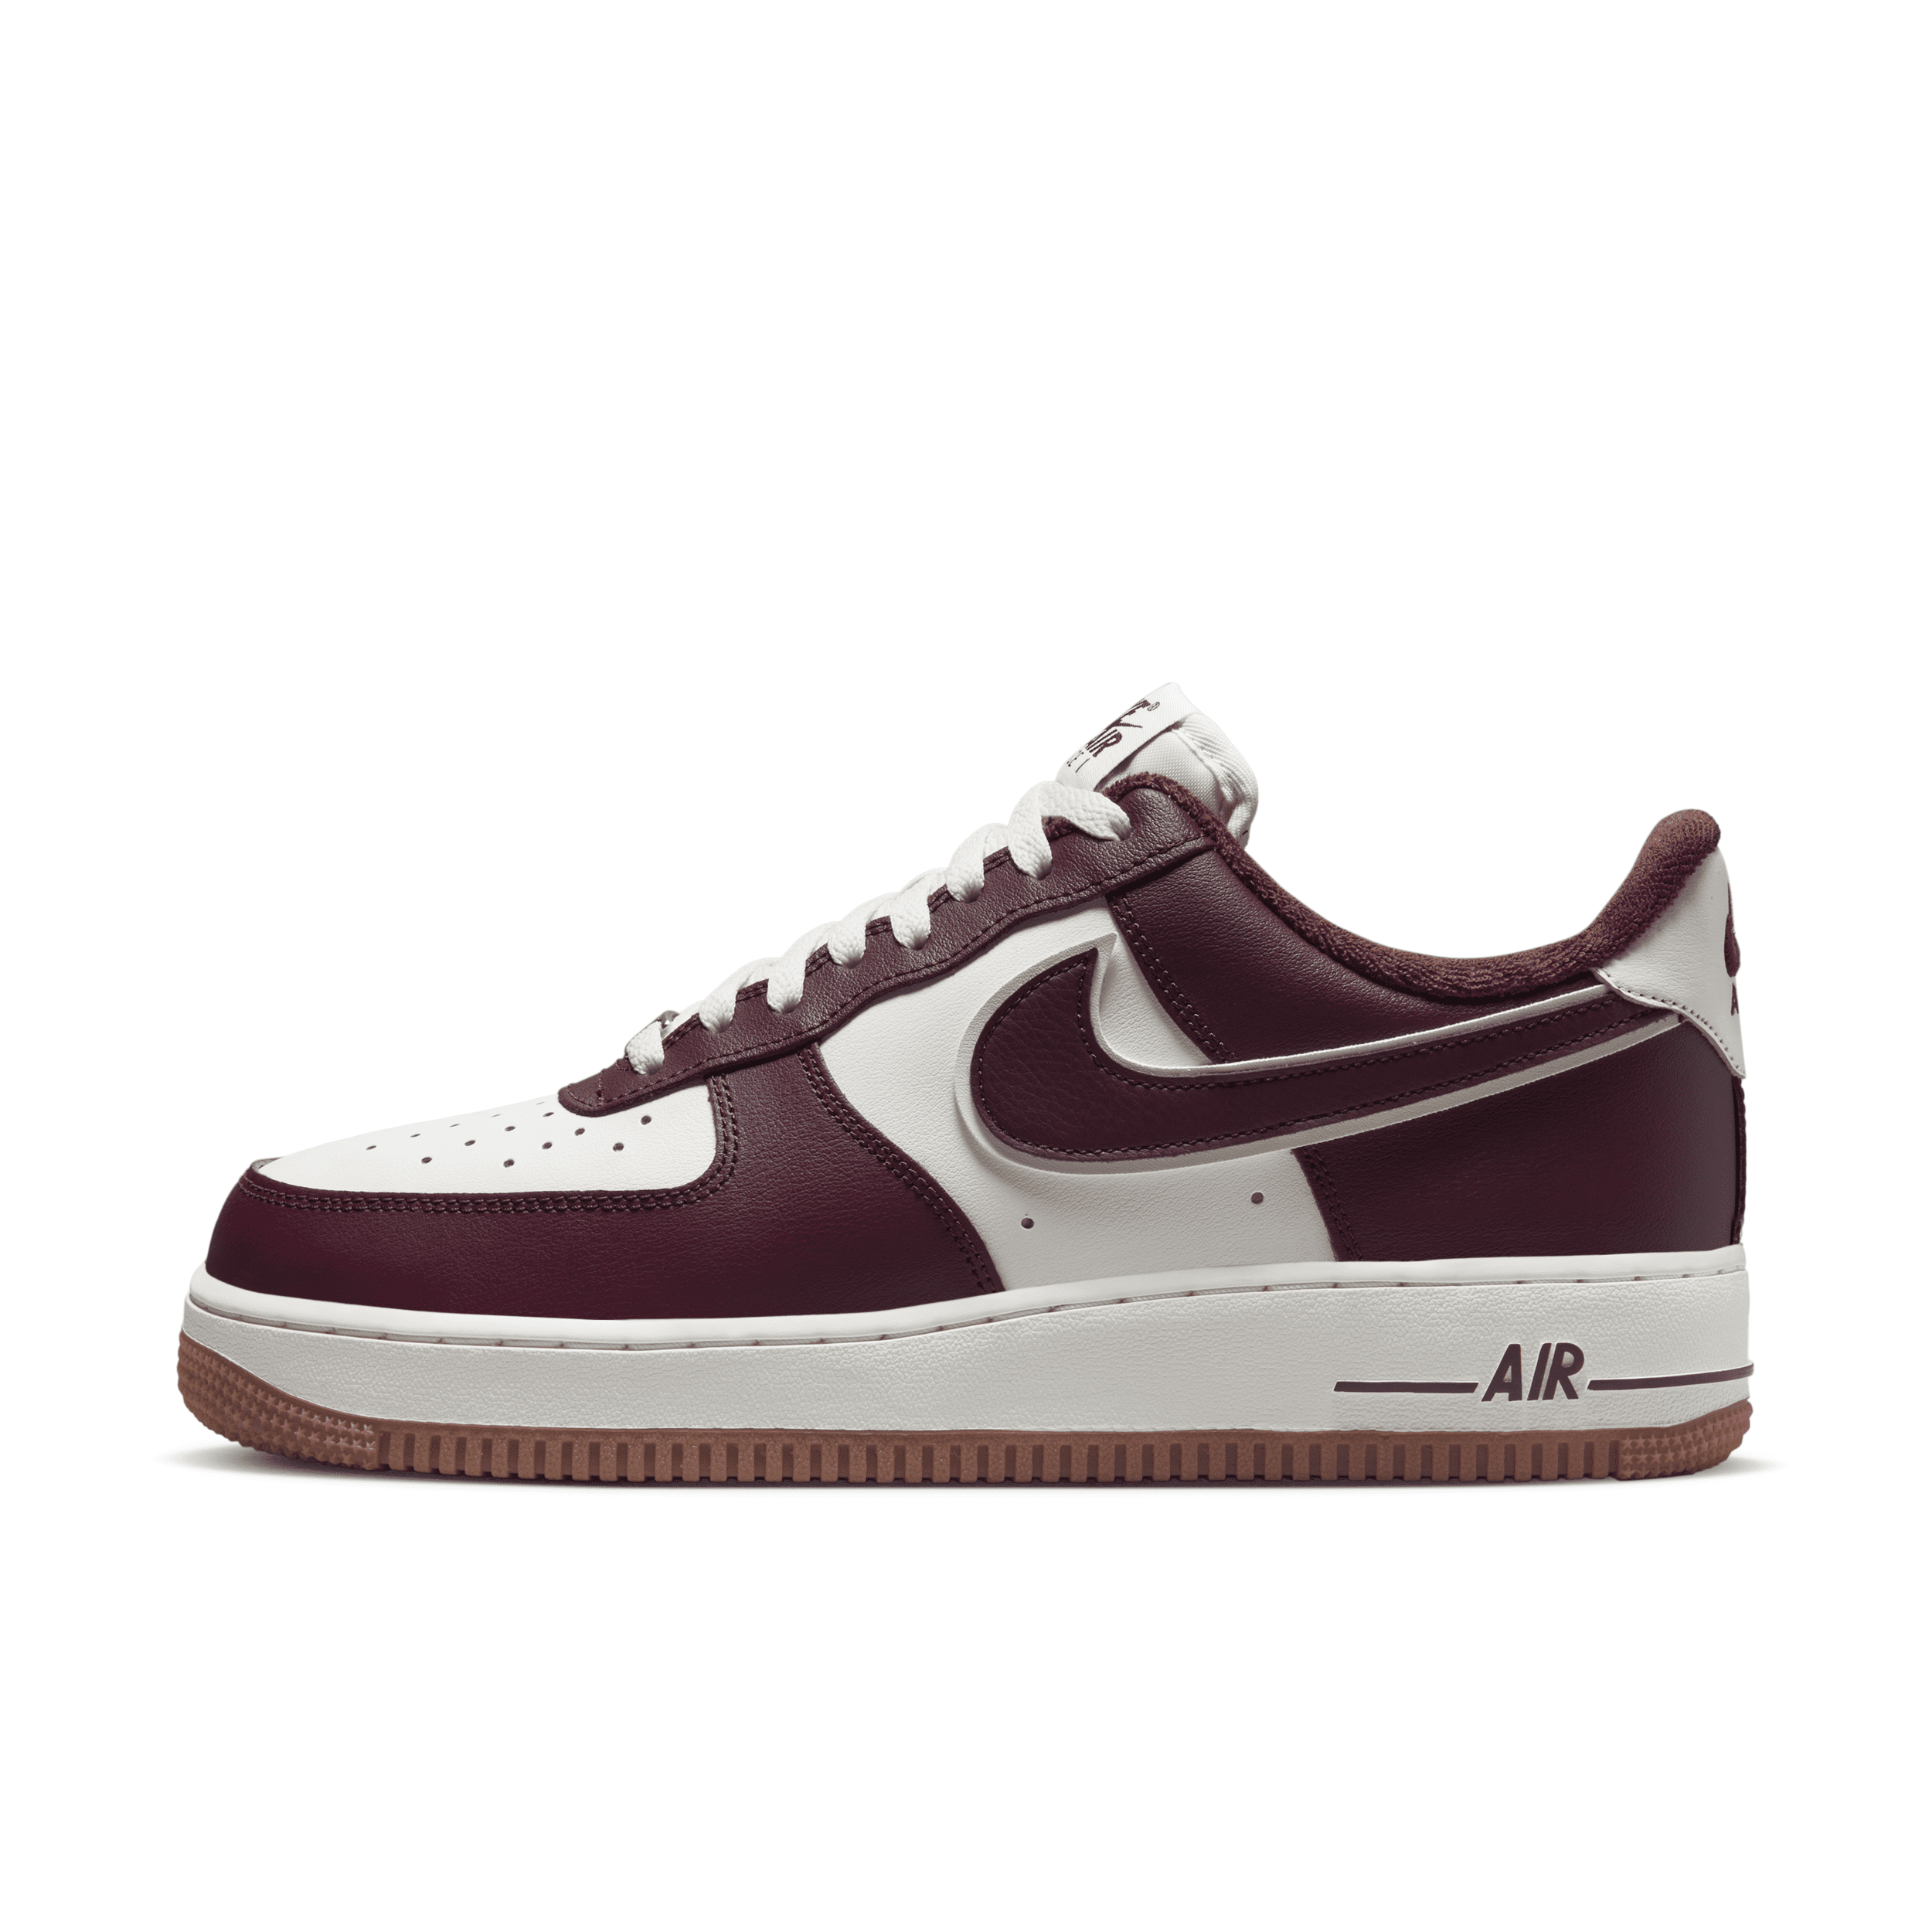 NIKE MEN'S AIR FORCE 1 '07 LV8 SHOES,1007832680